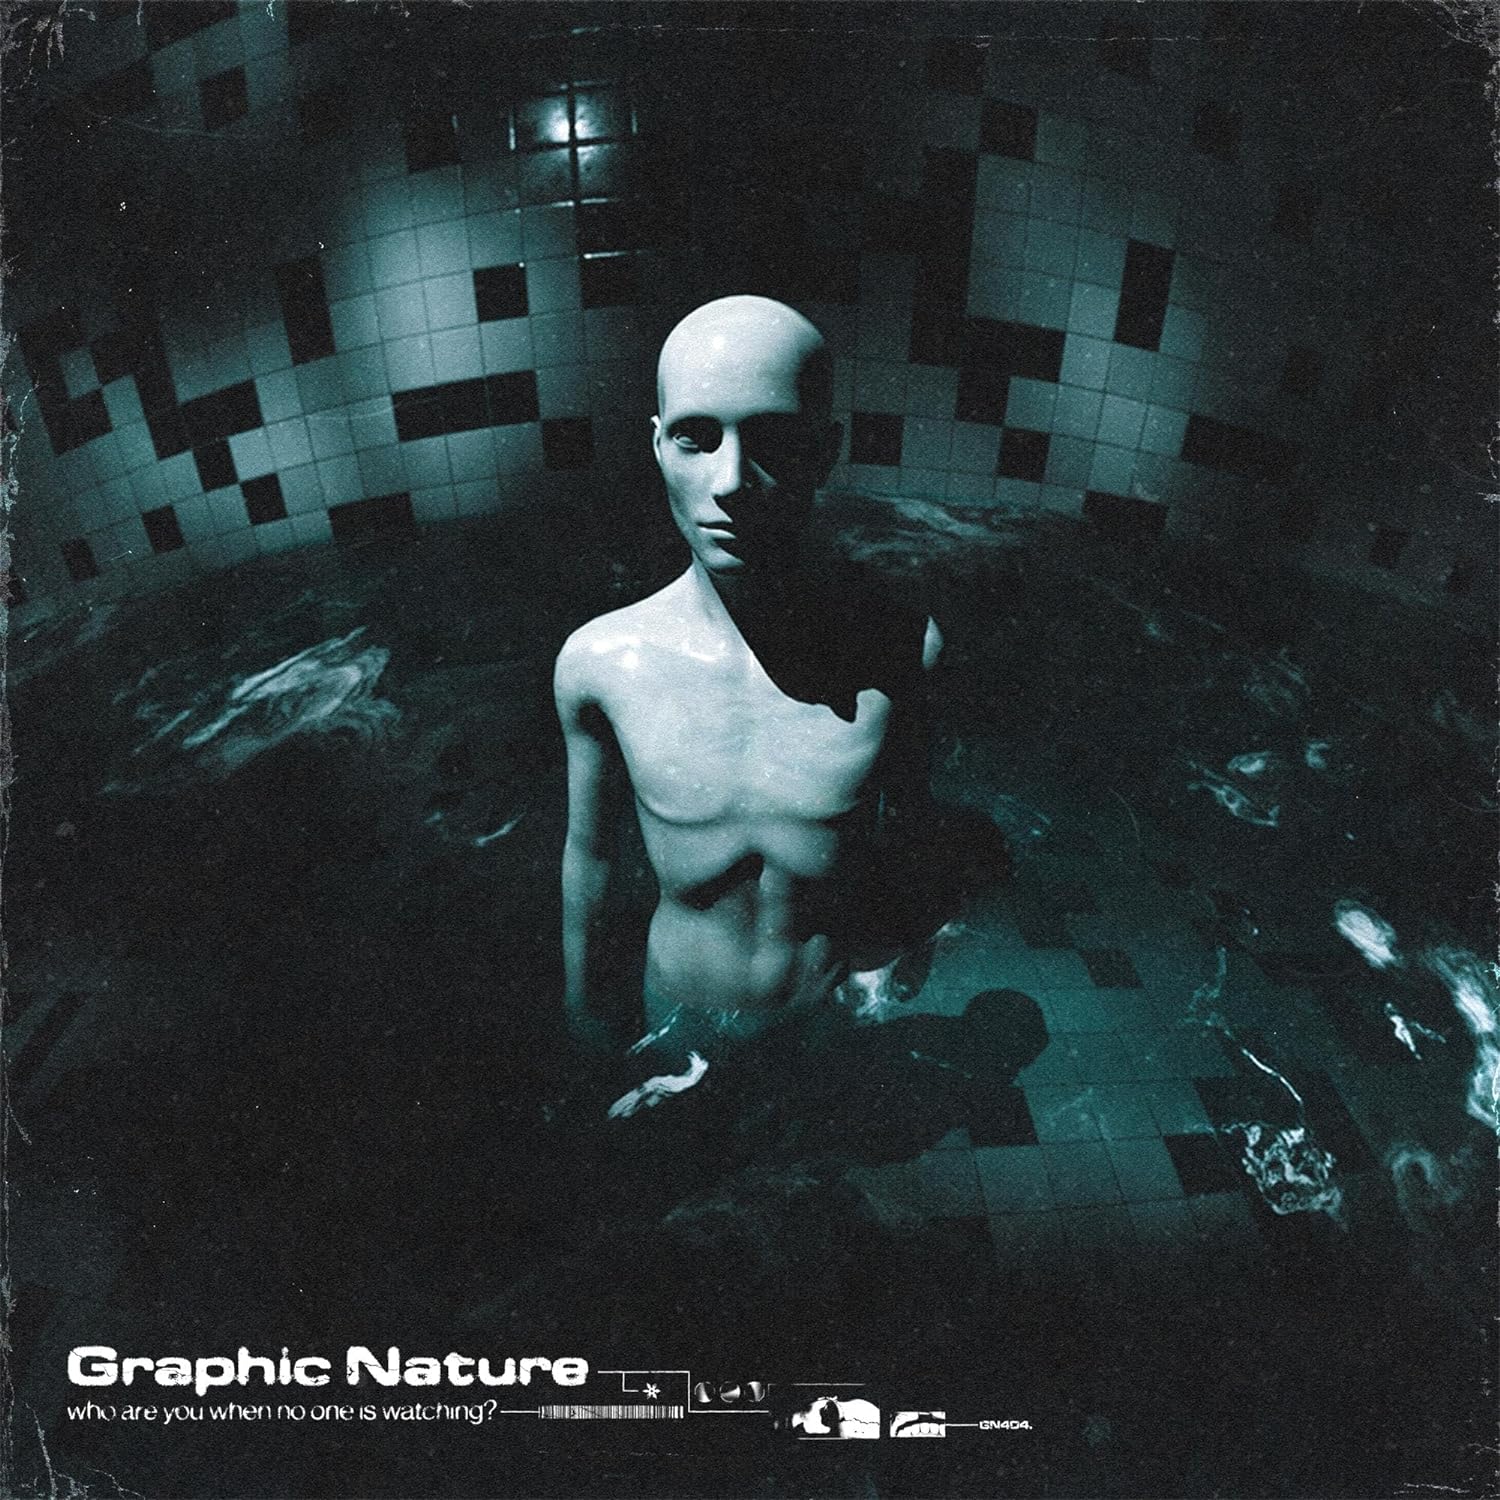 Graphic Nature "Who Are You When No One Is Watching?" CD - PRE-ORDER